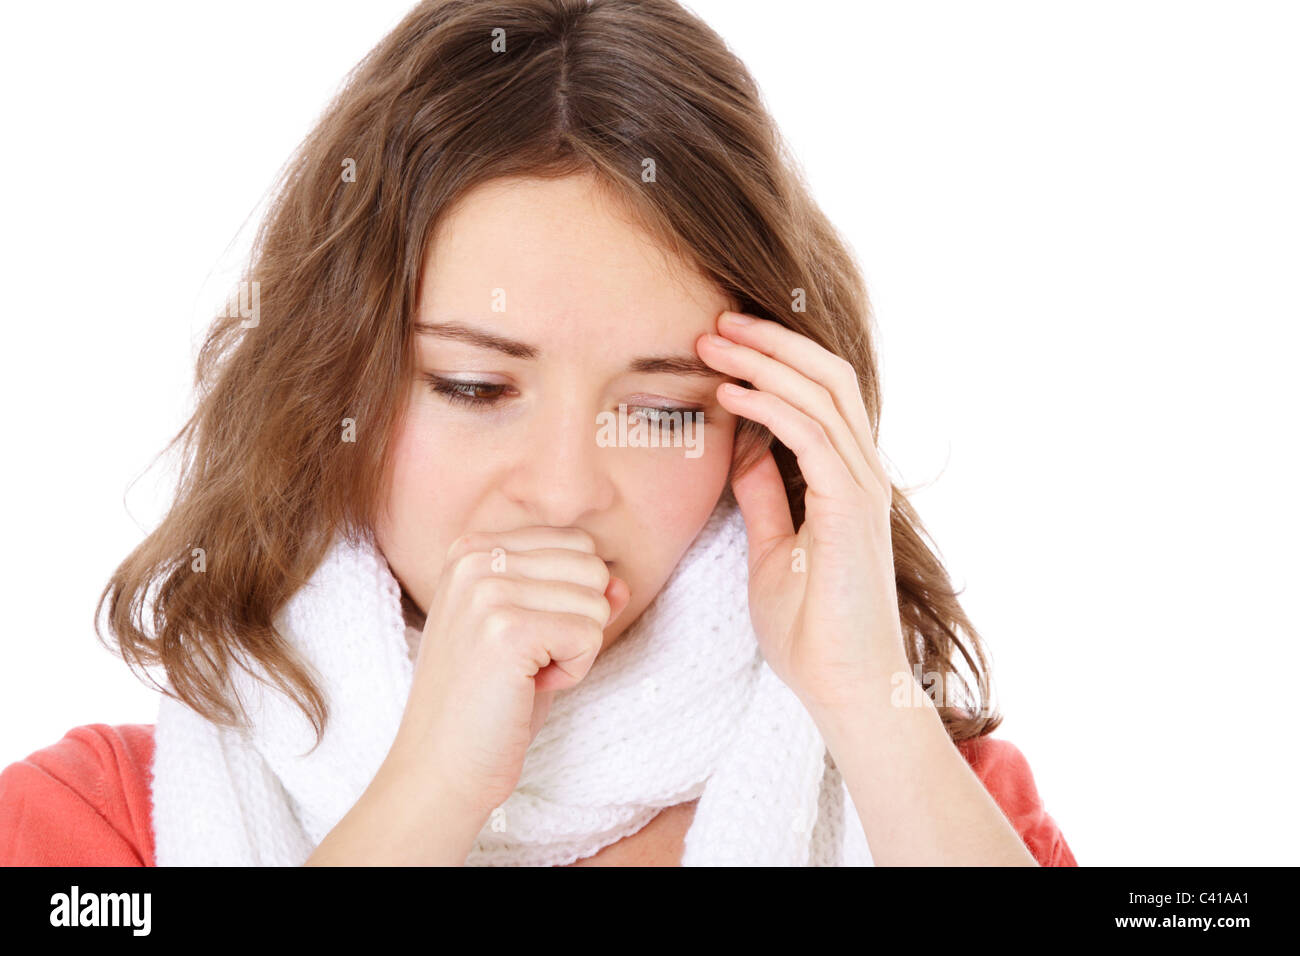 Attractive young woman feels unwell. All on white background. Stock Photo